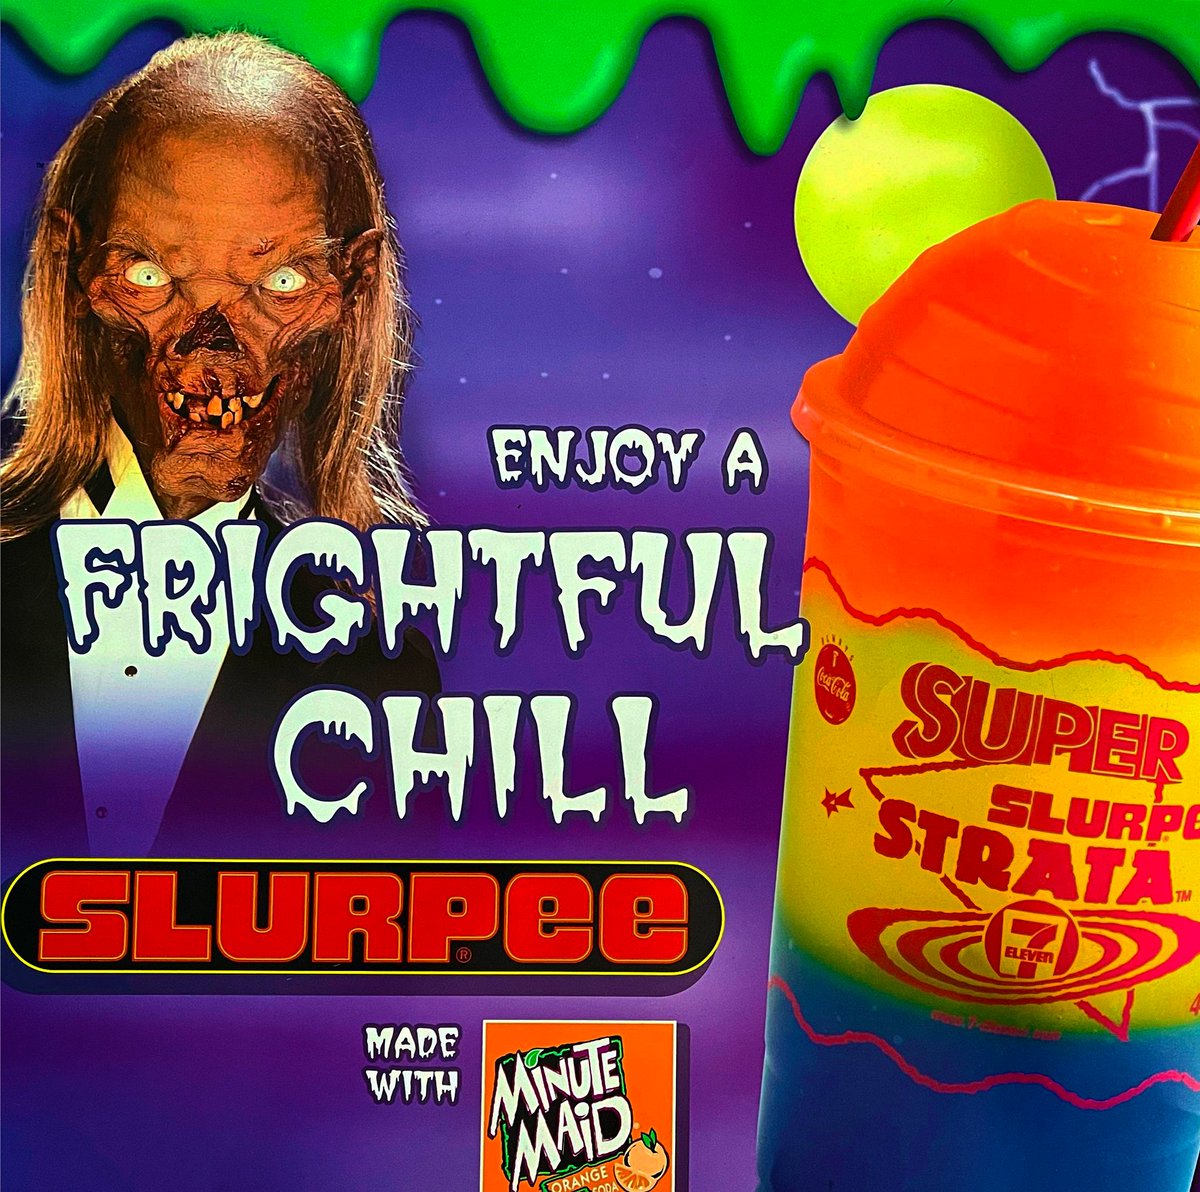 Back in 2000, the Crypt Keeper was hired to promote 7-Eleven Slurpees, proving once and for all that things don't need to make sense to be awesome.